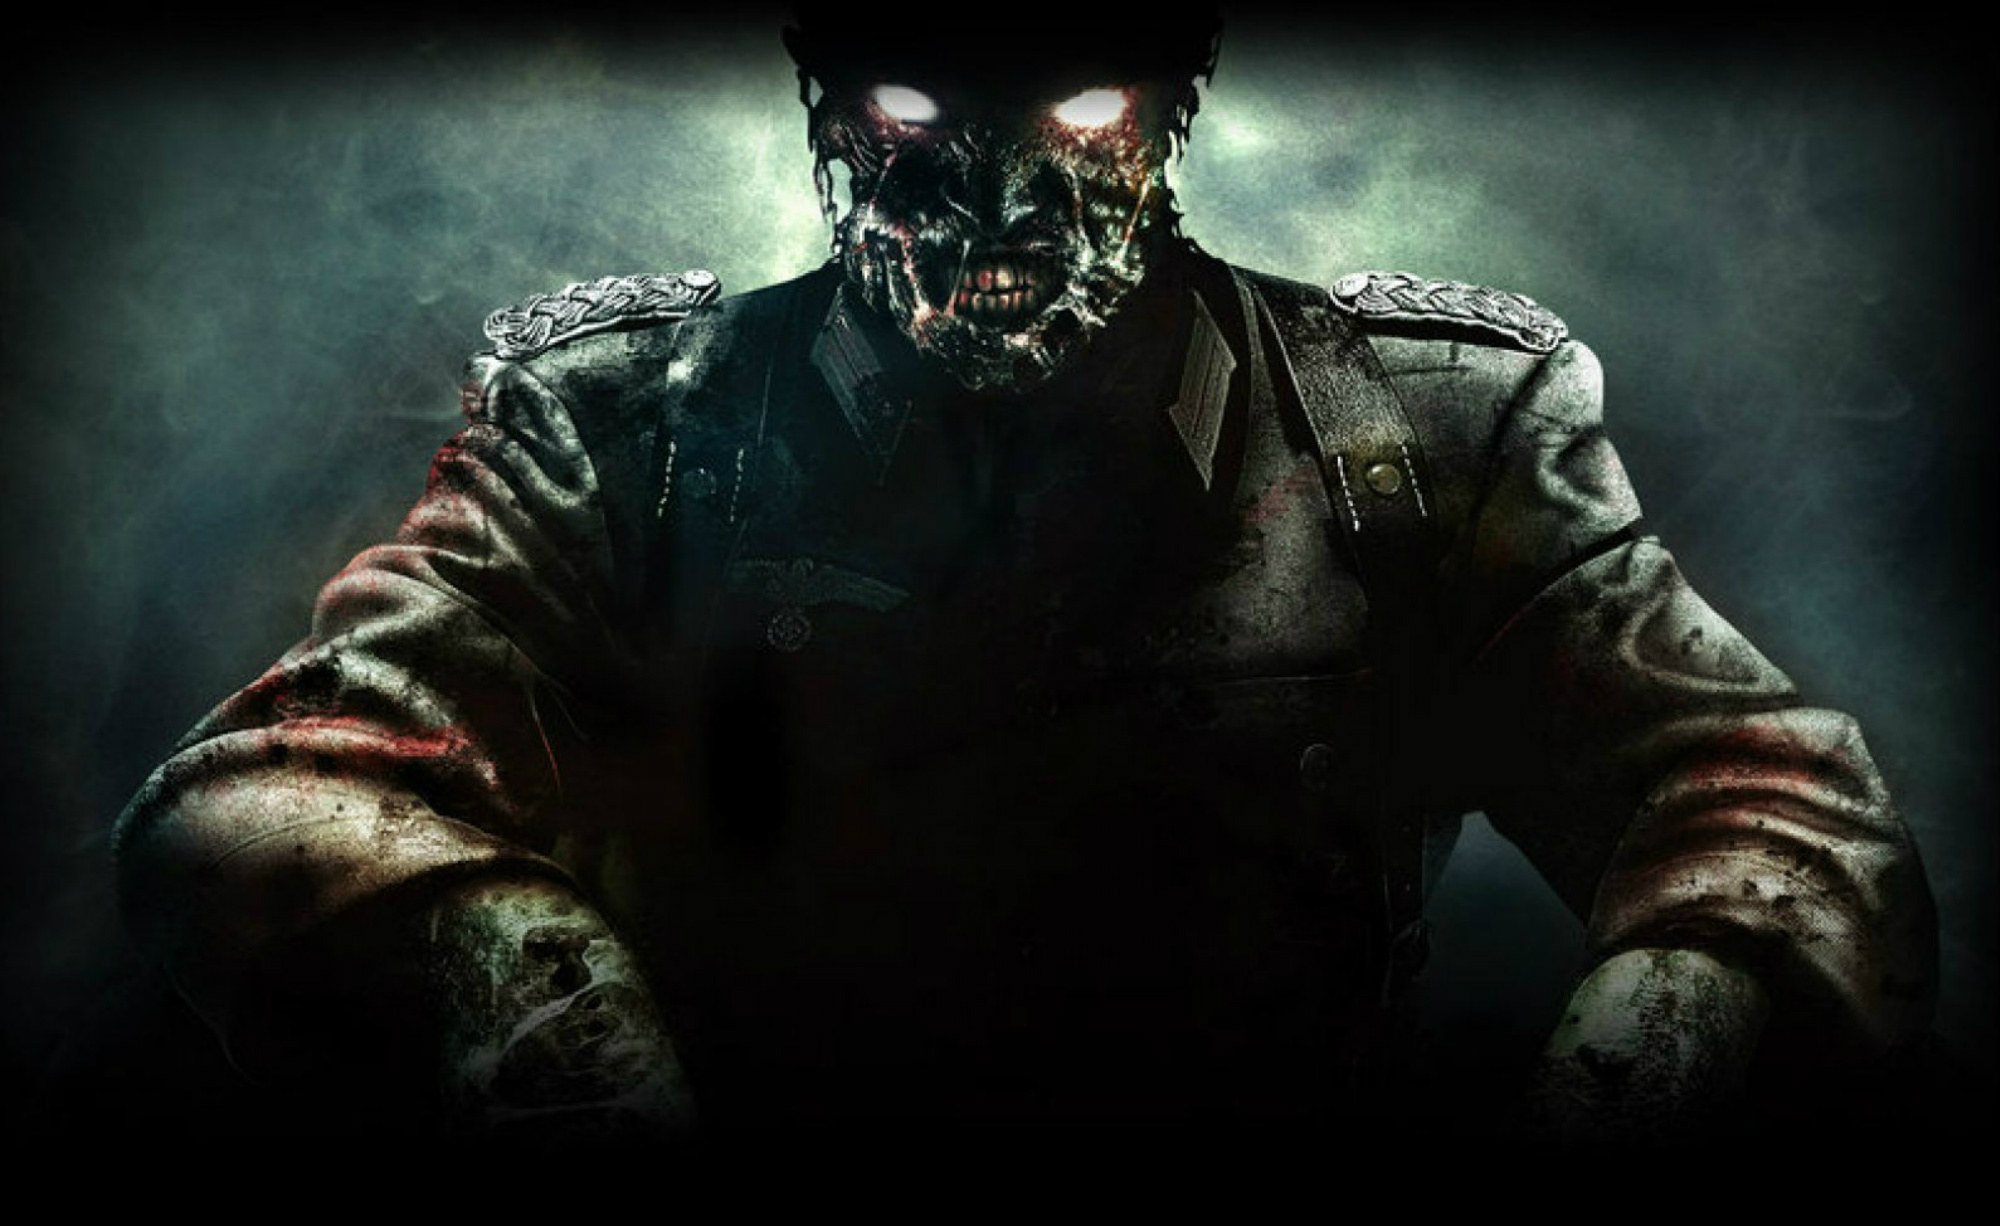 Image - Wiki-background | Call of Duty Zombies Wiki ...